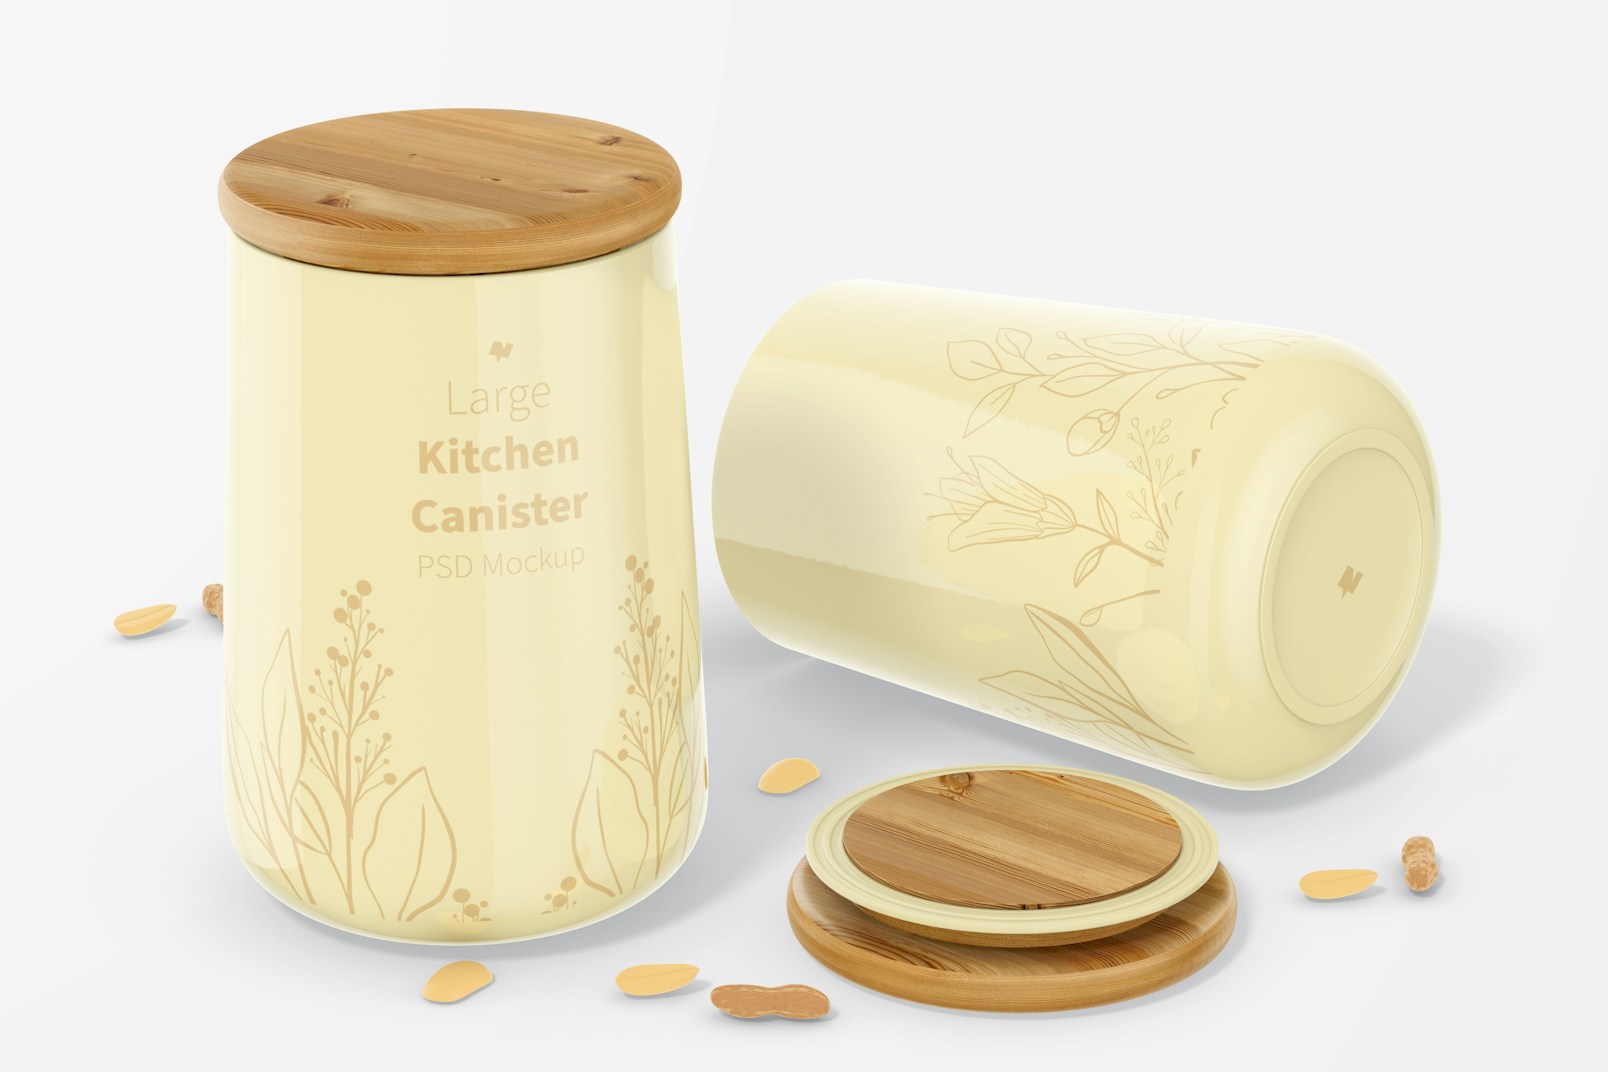 Large Kitchen Canister Mockup, Standing and Dropped